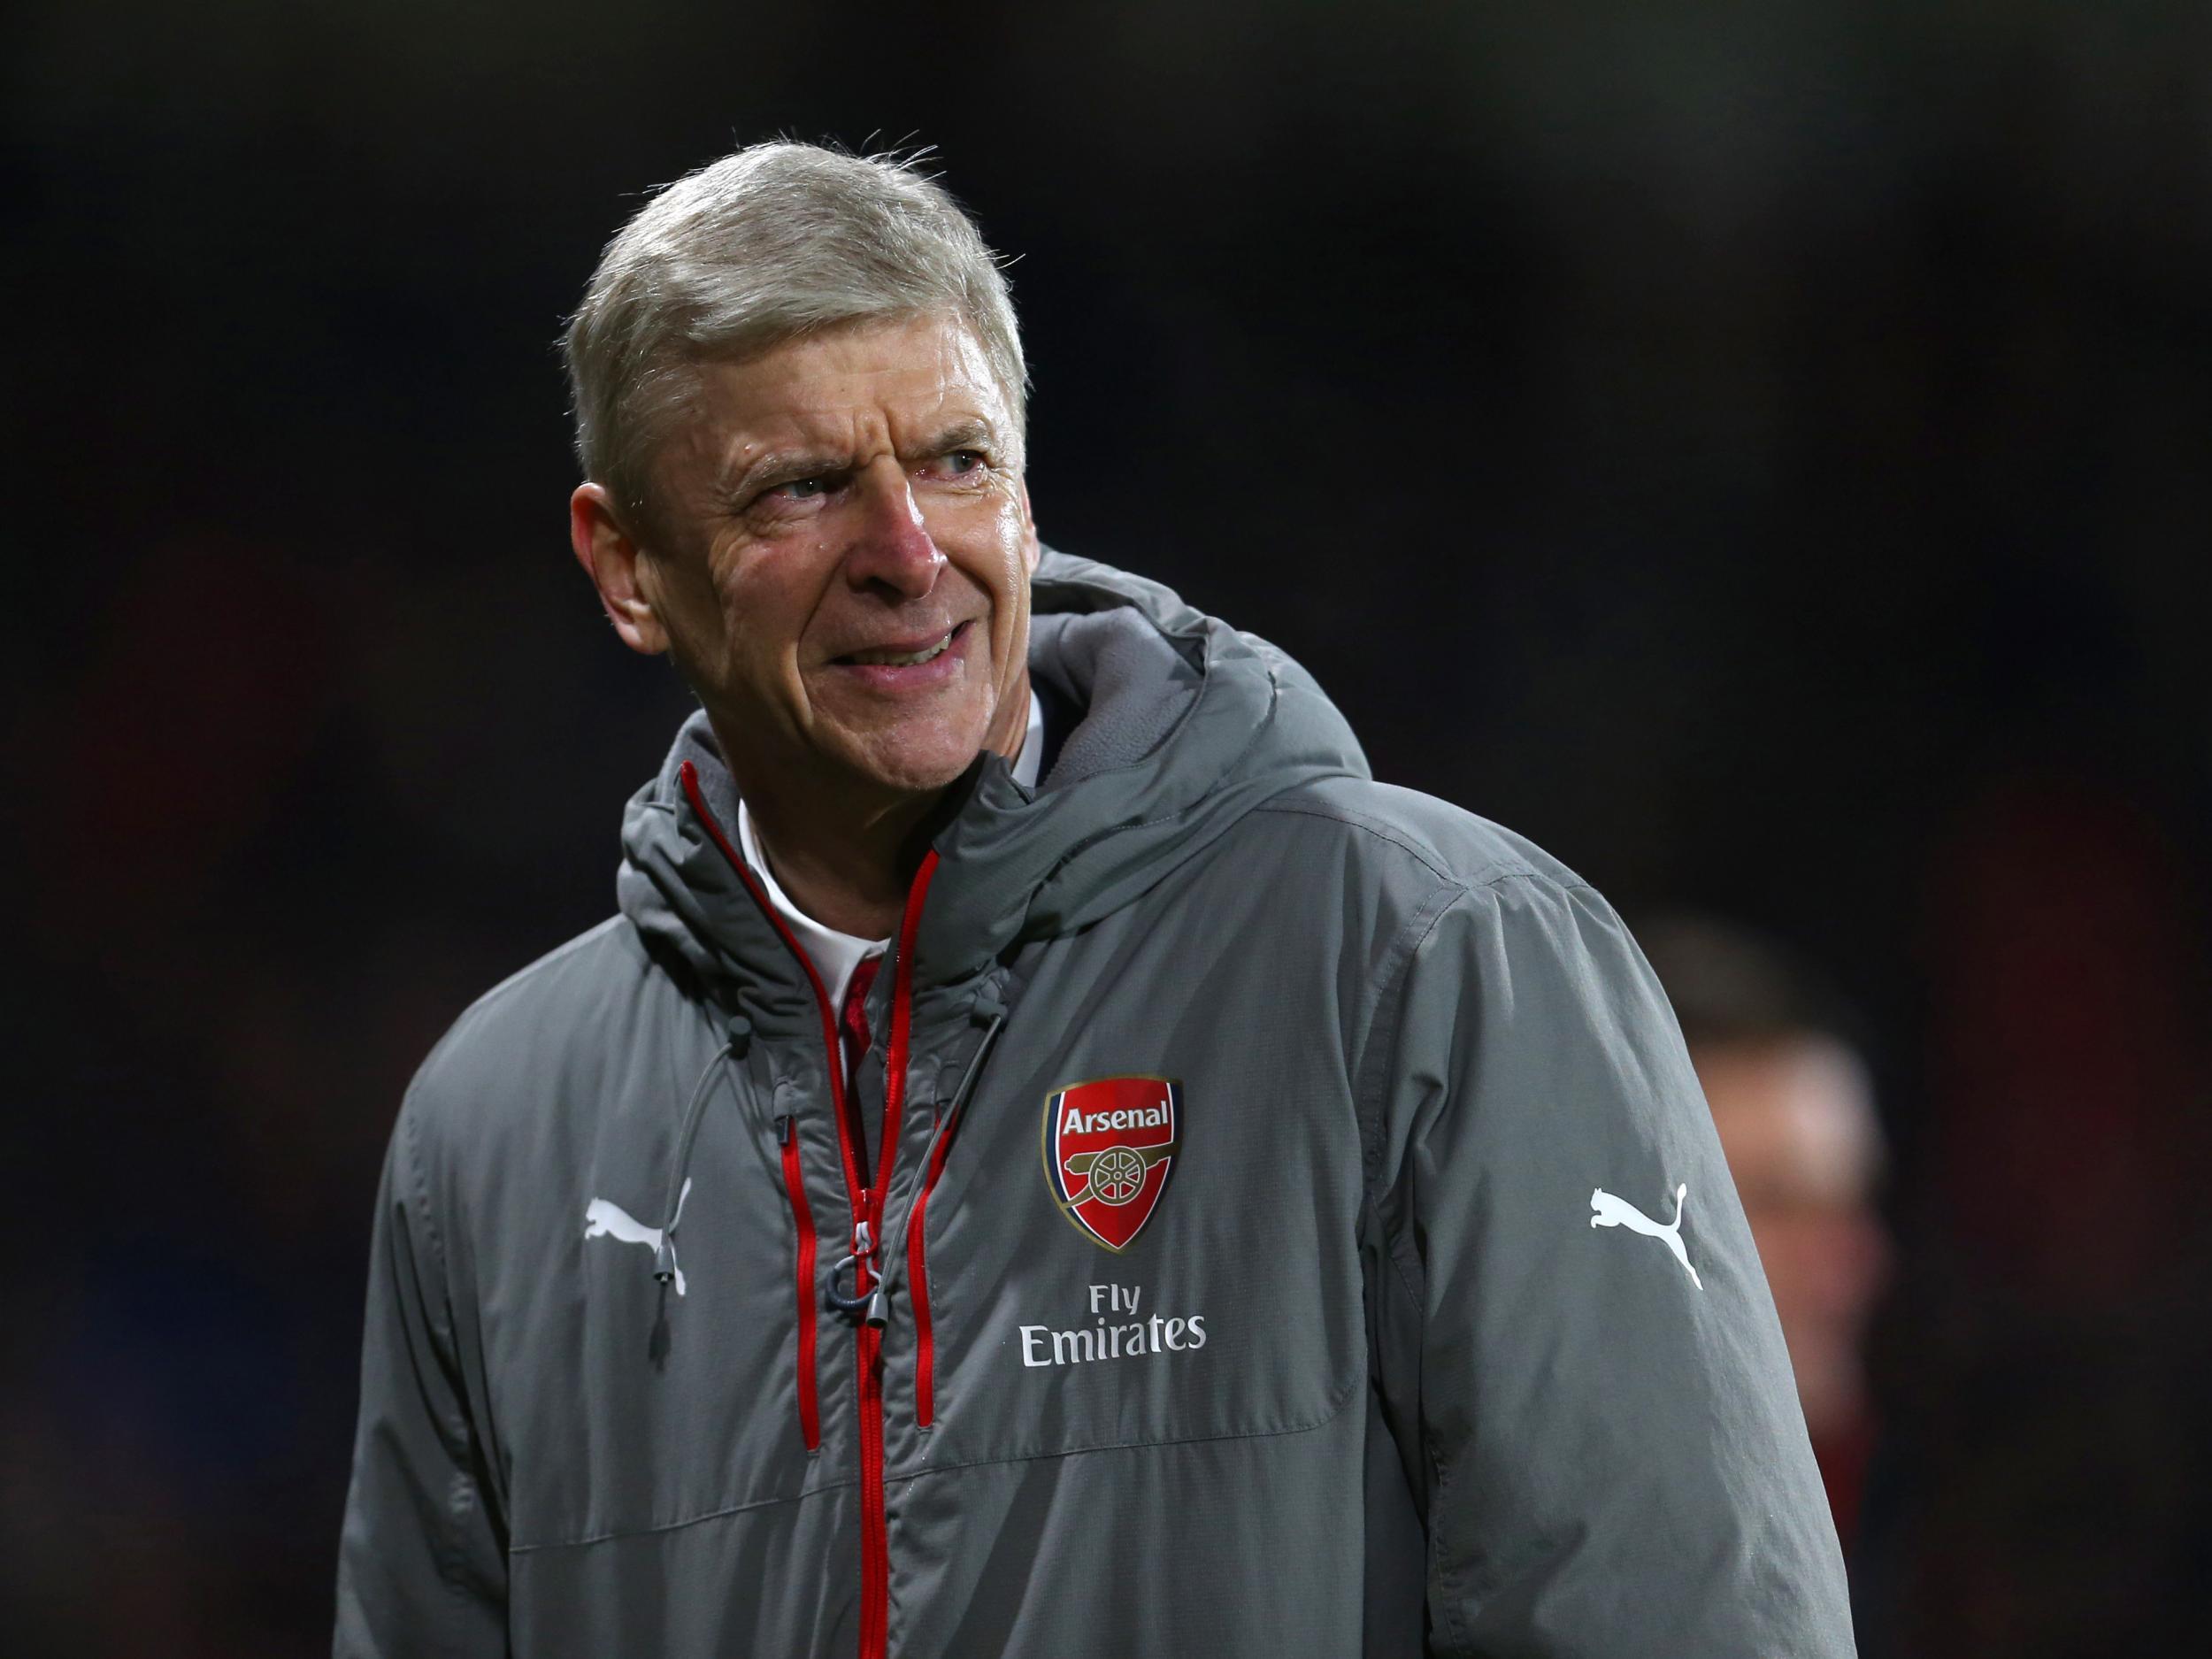 Wenger denied that he told Ian Wright his time at Arsenal was 'coming to an end'